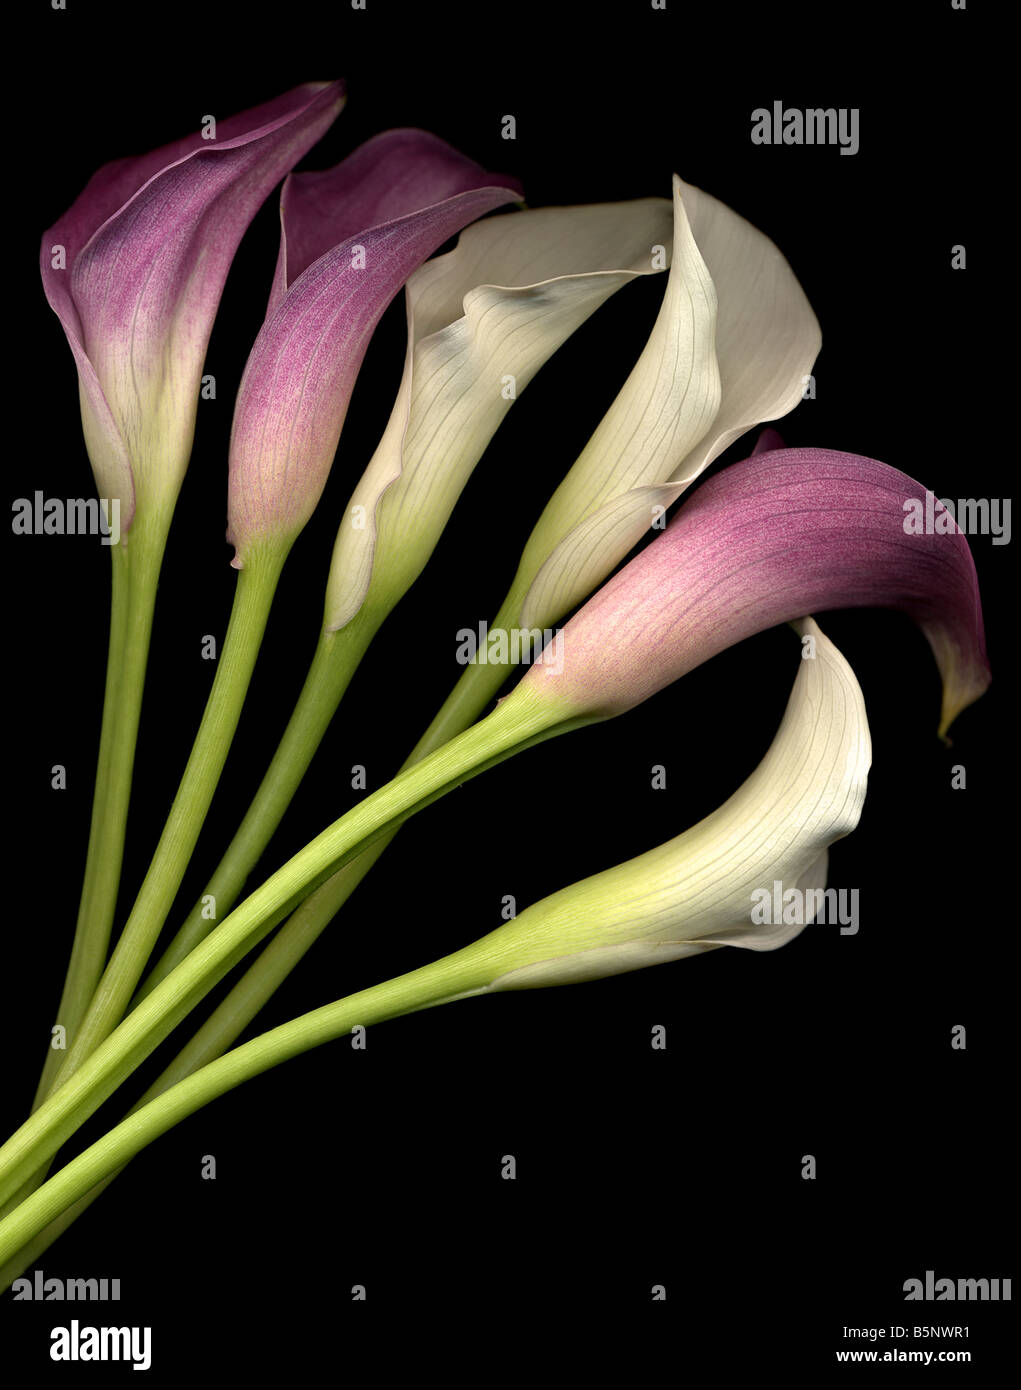 Six pink and white calla lilies on black background close up Stock Photo